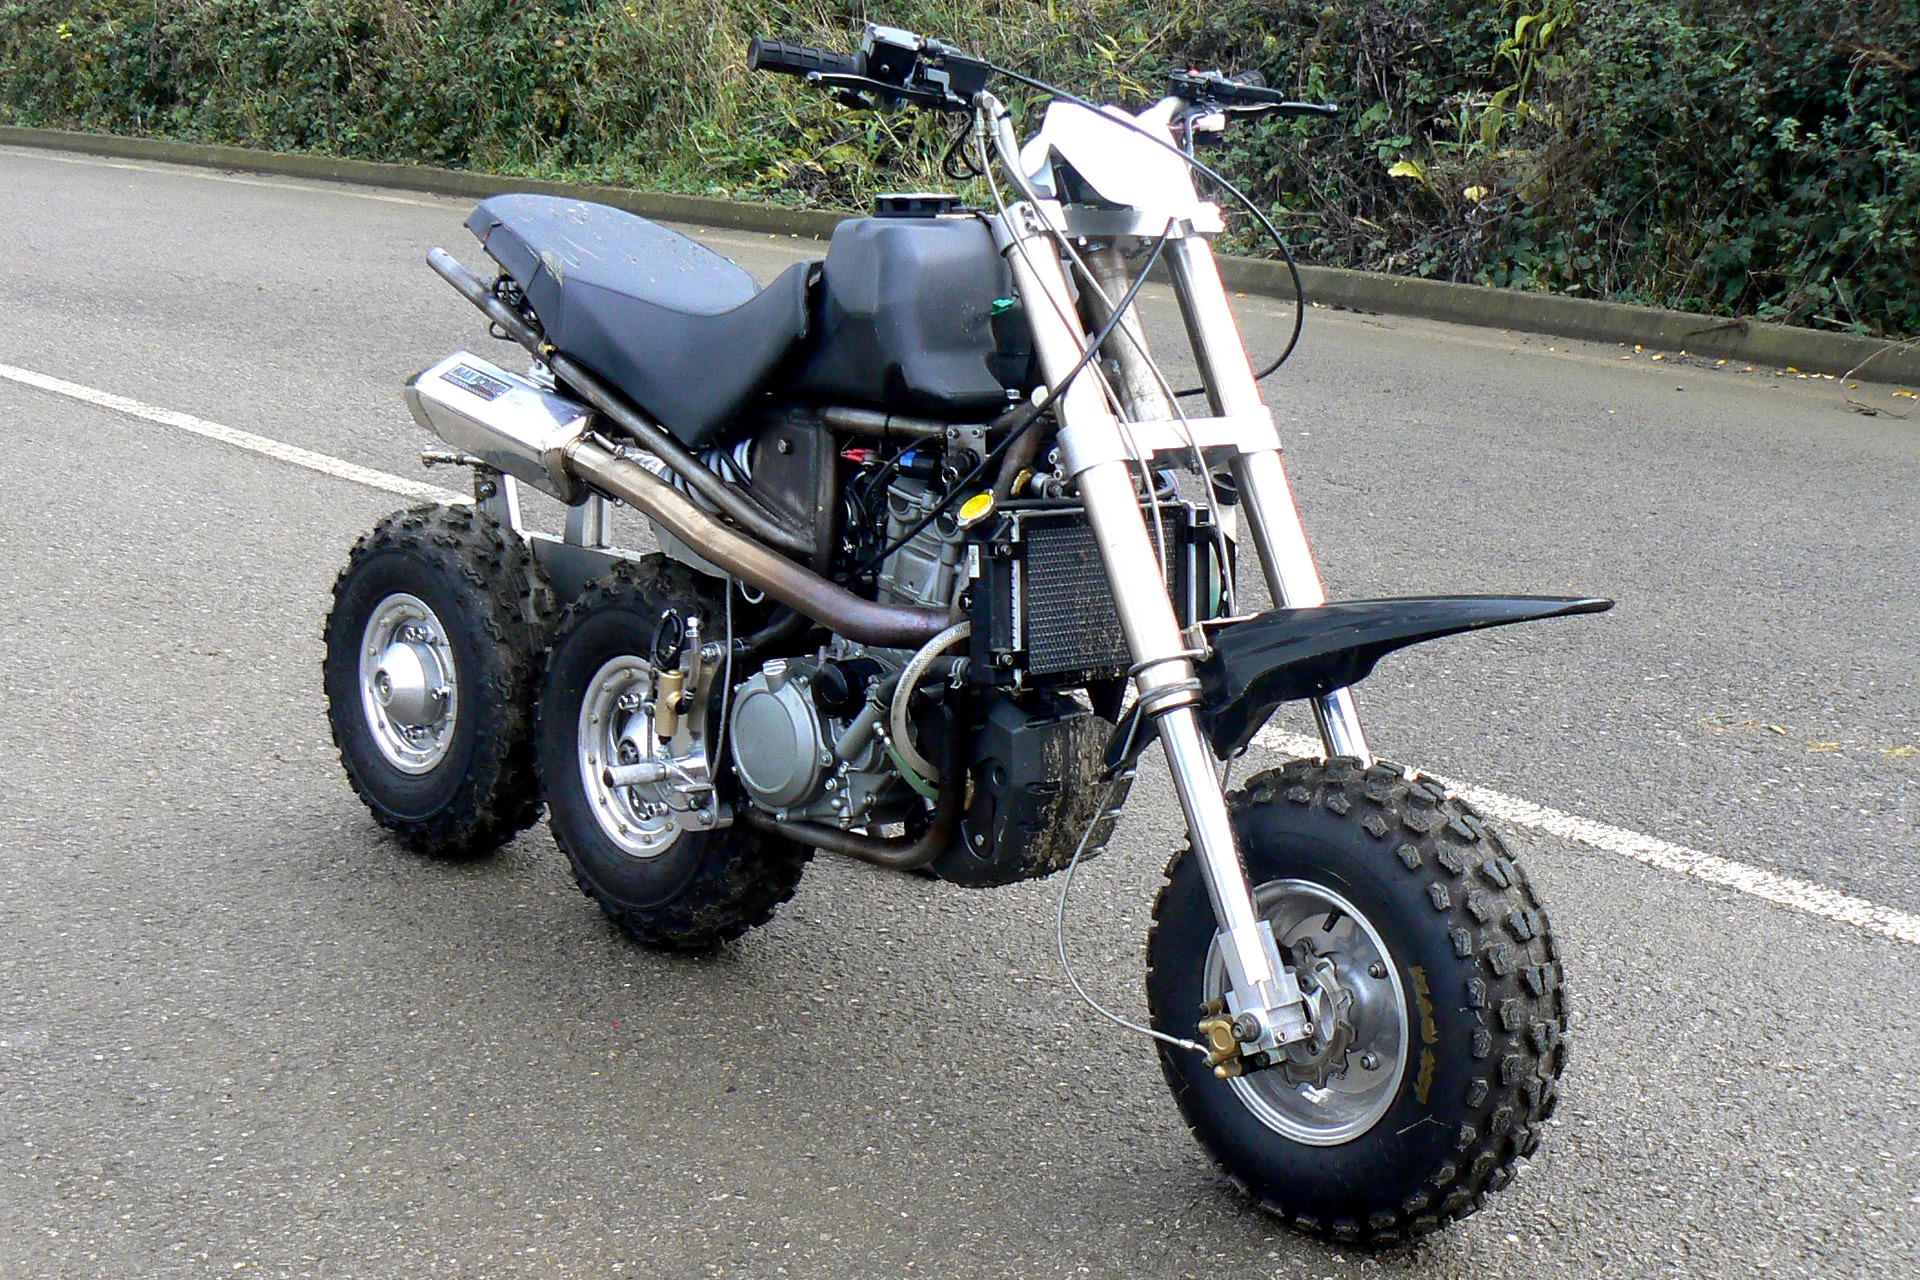 3-wheel-in-line-motorcycle-gets-closer-t